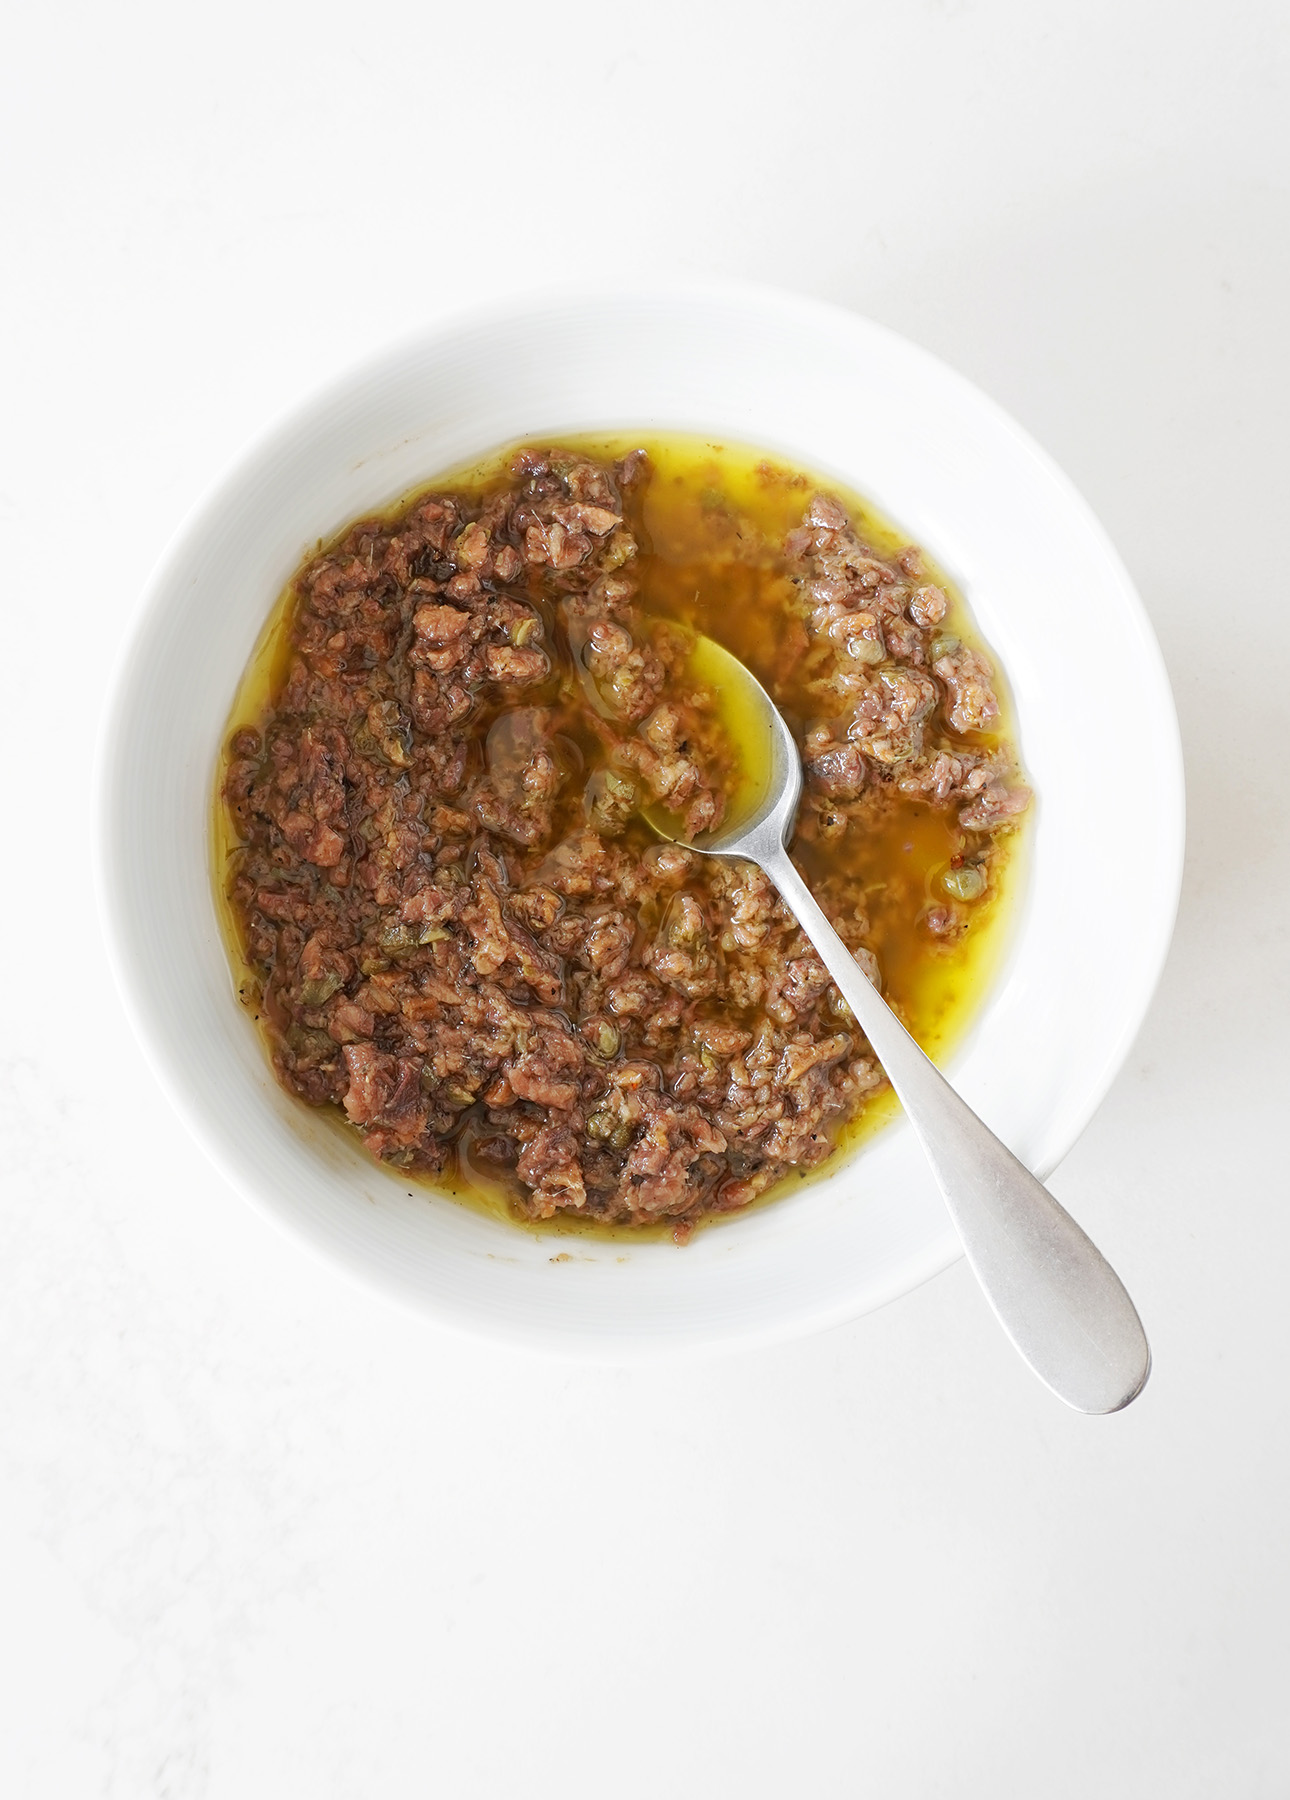 Anchoïade, a French condiment made with anchovies, olive oil, red wine vinegar, capers, and garlic // FoodNouveau.com